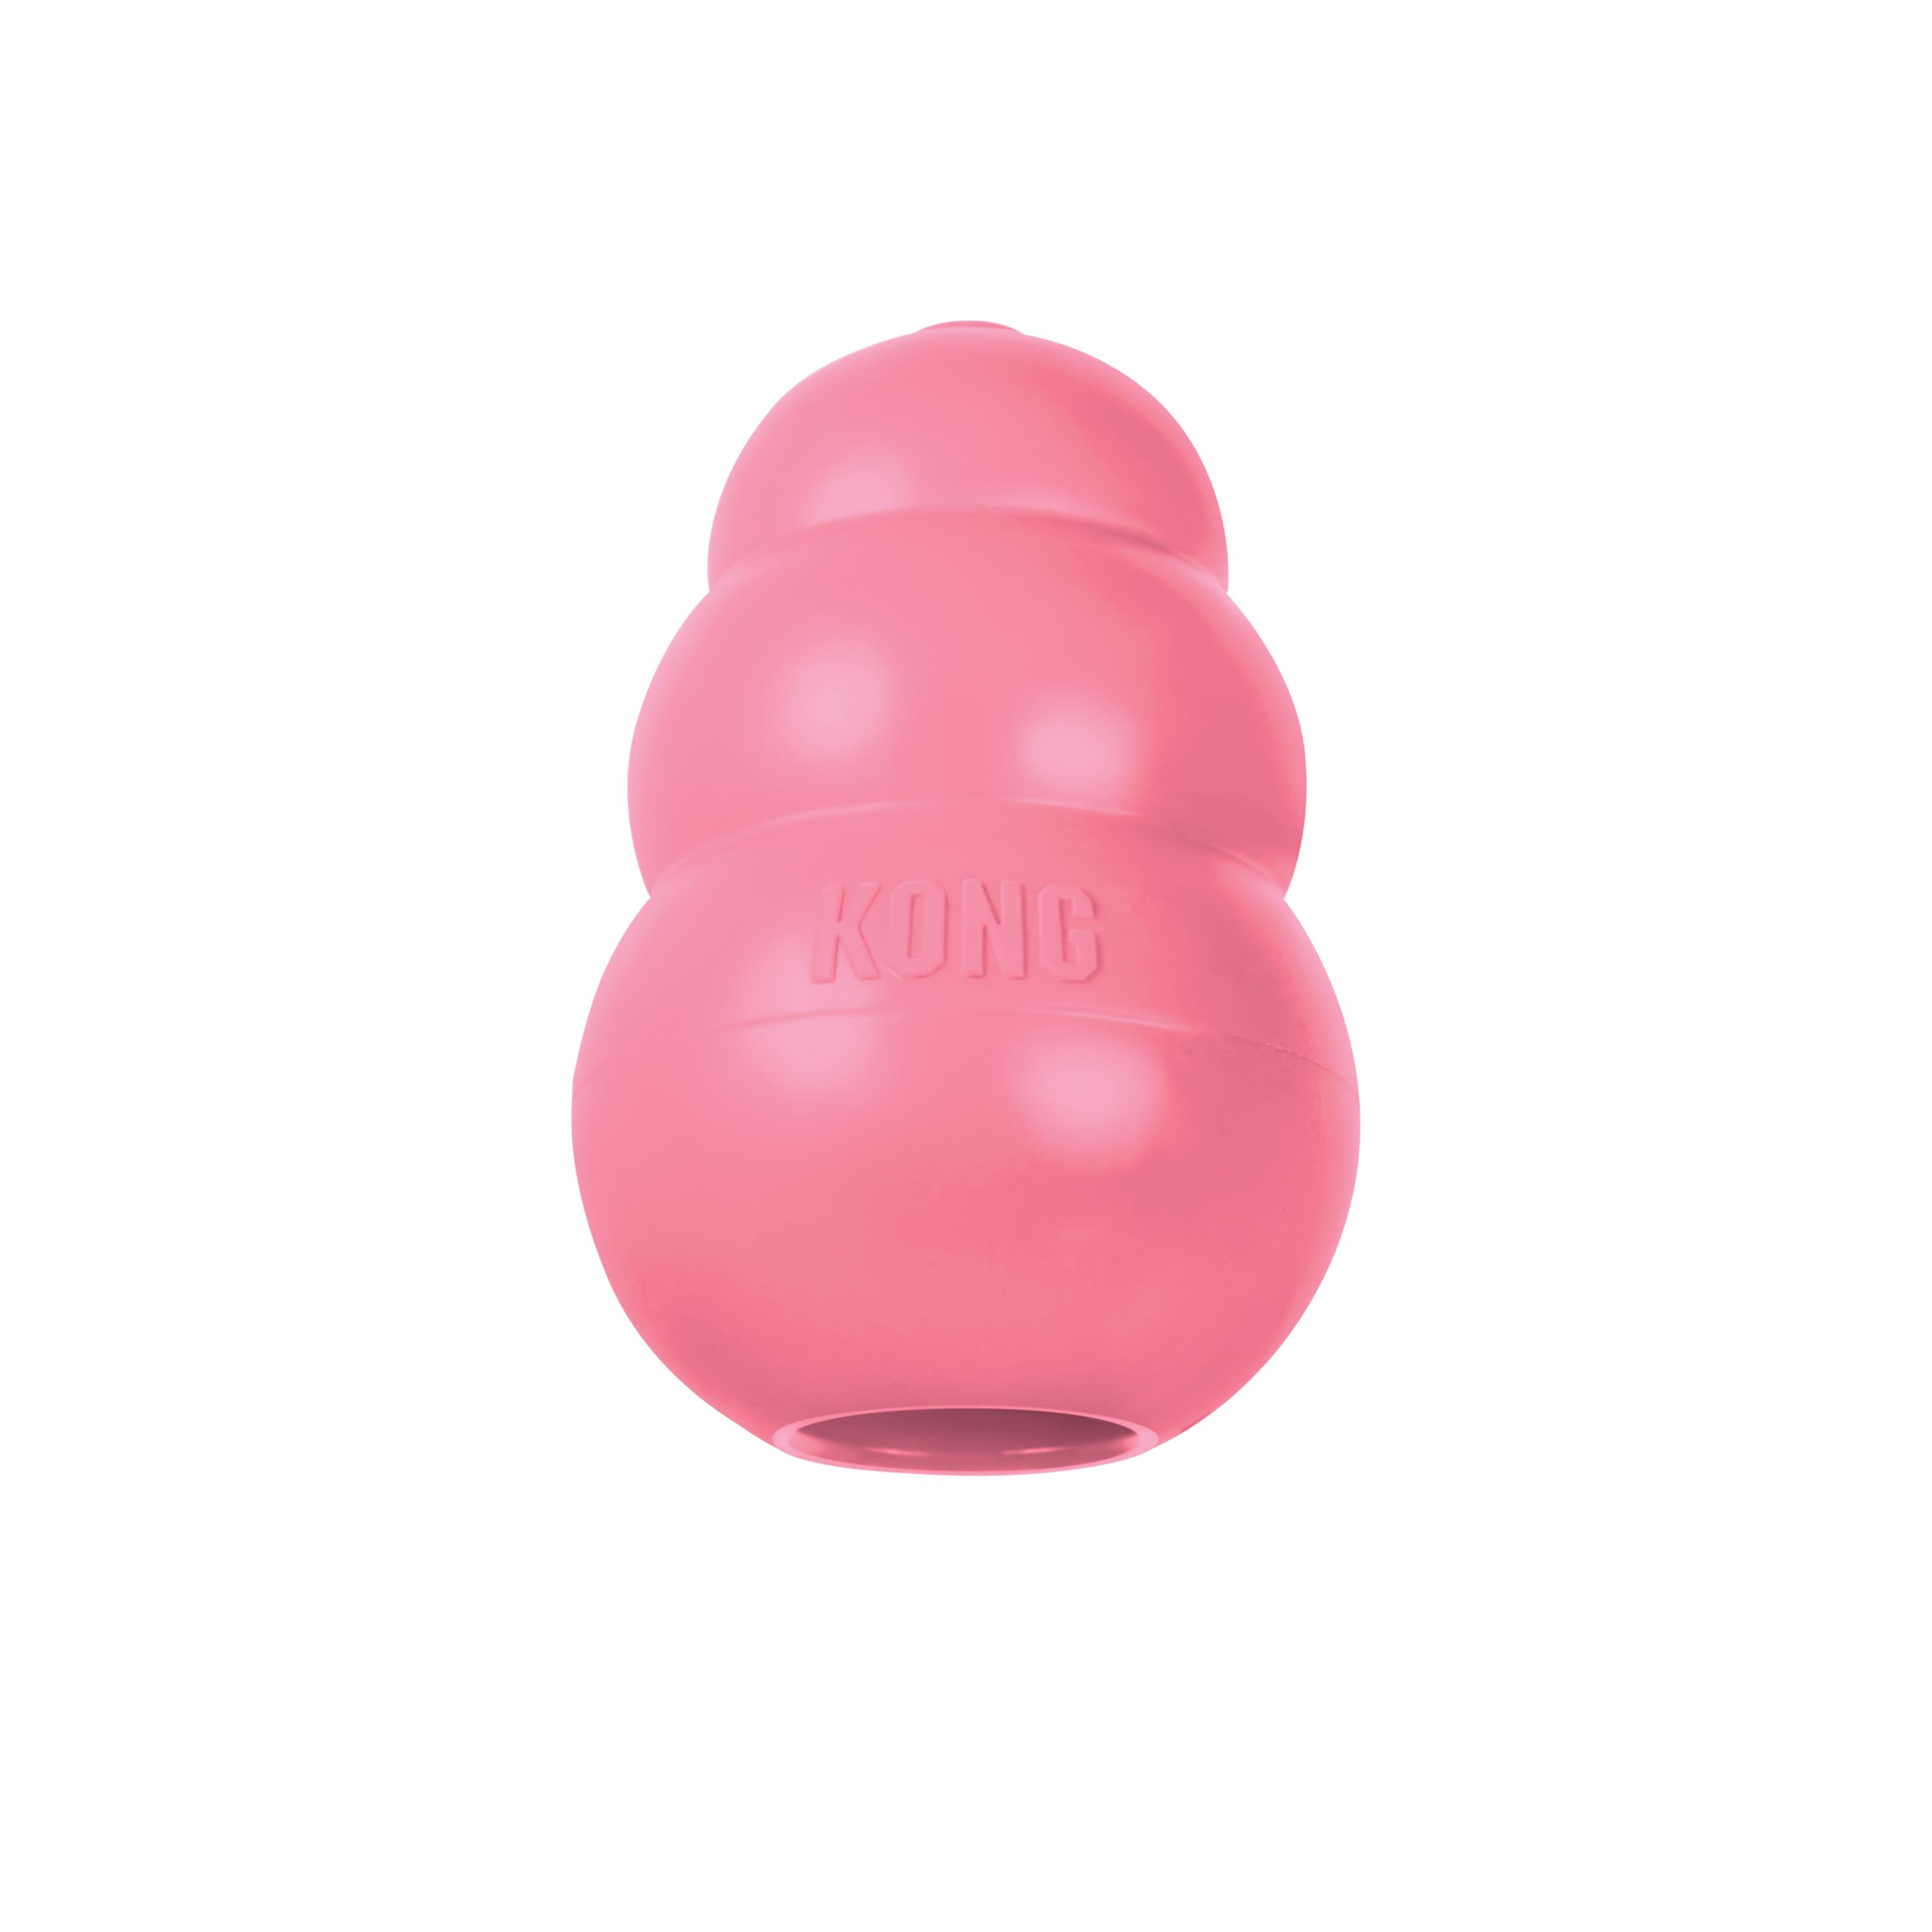 KONG Puppy product image